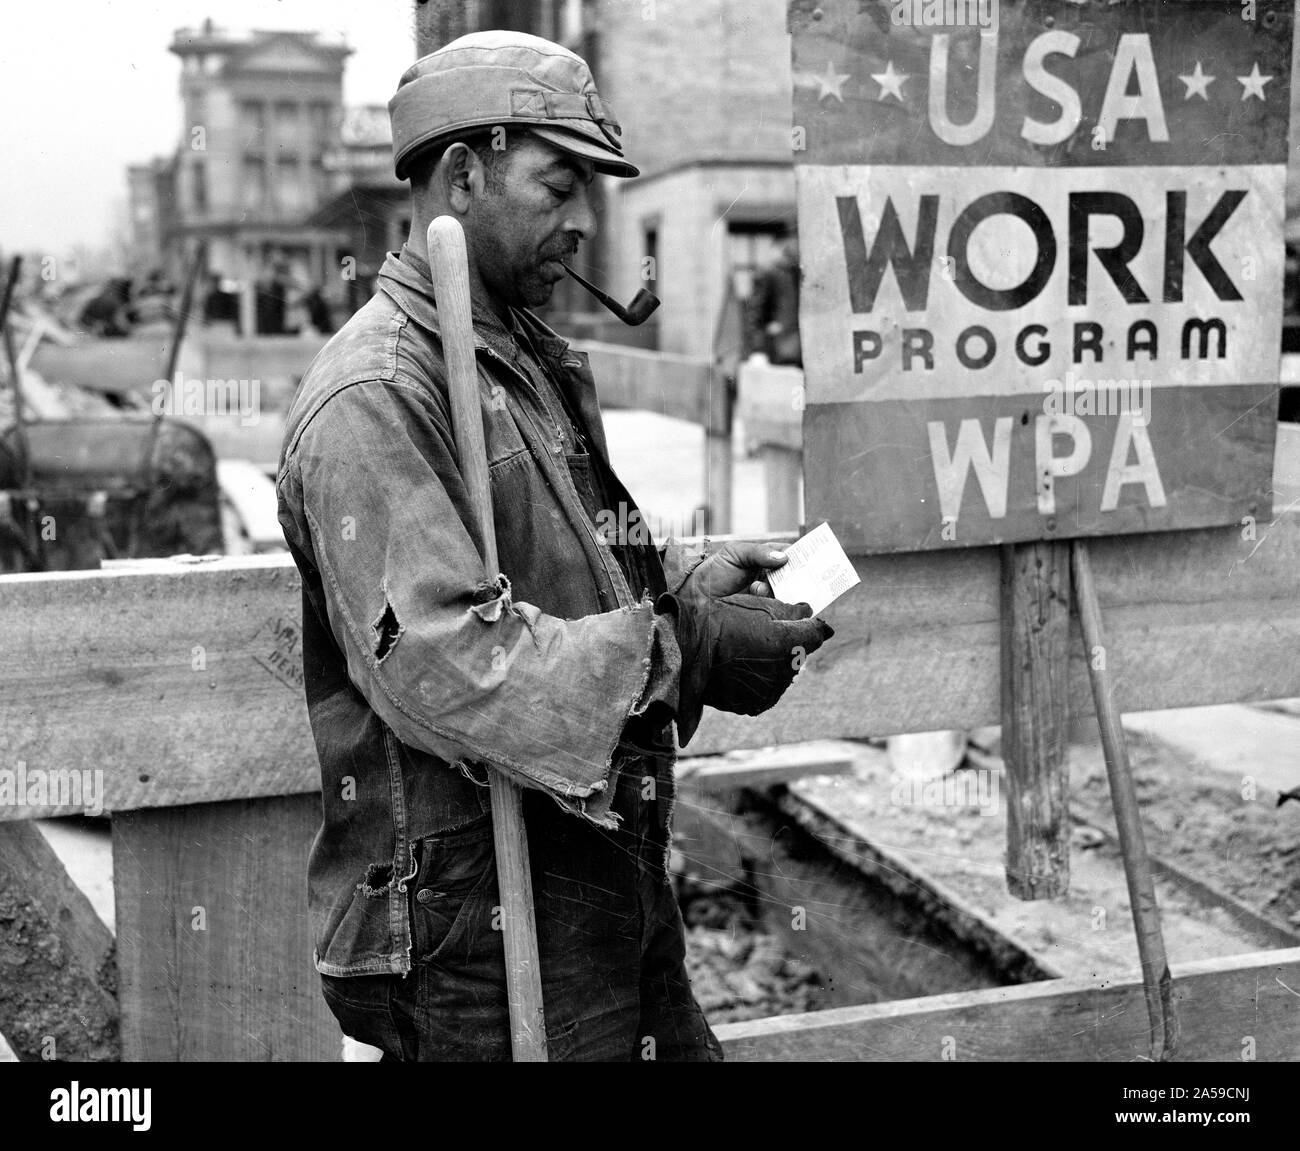 Worker with the WPA Work program USA ca. 1935-1939 Stock Photo